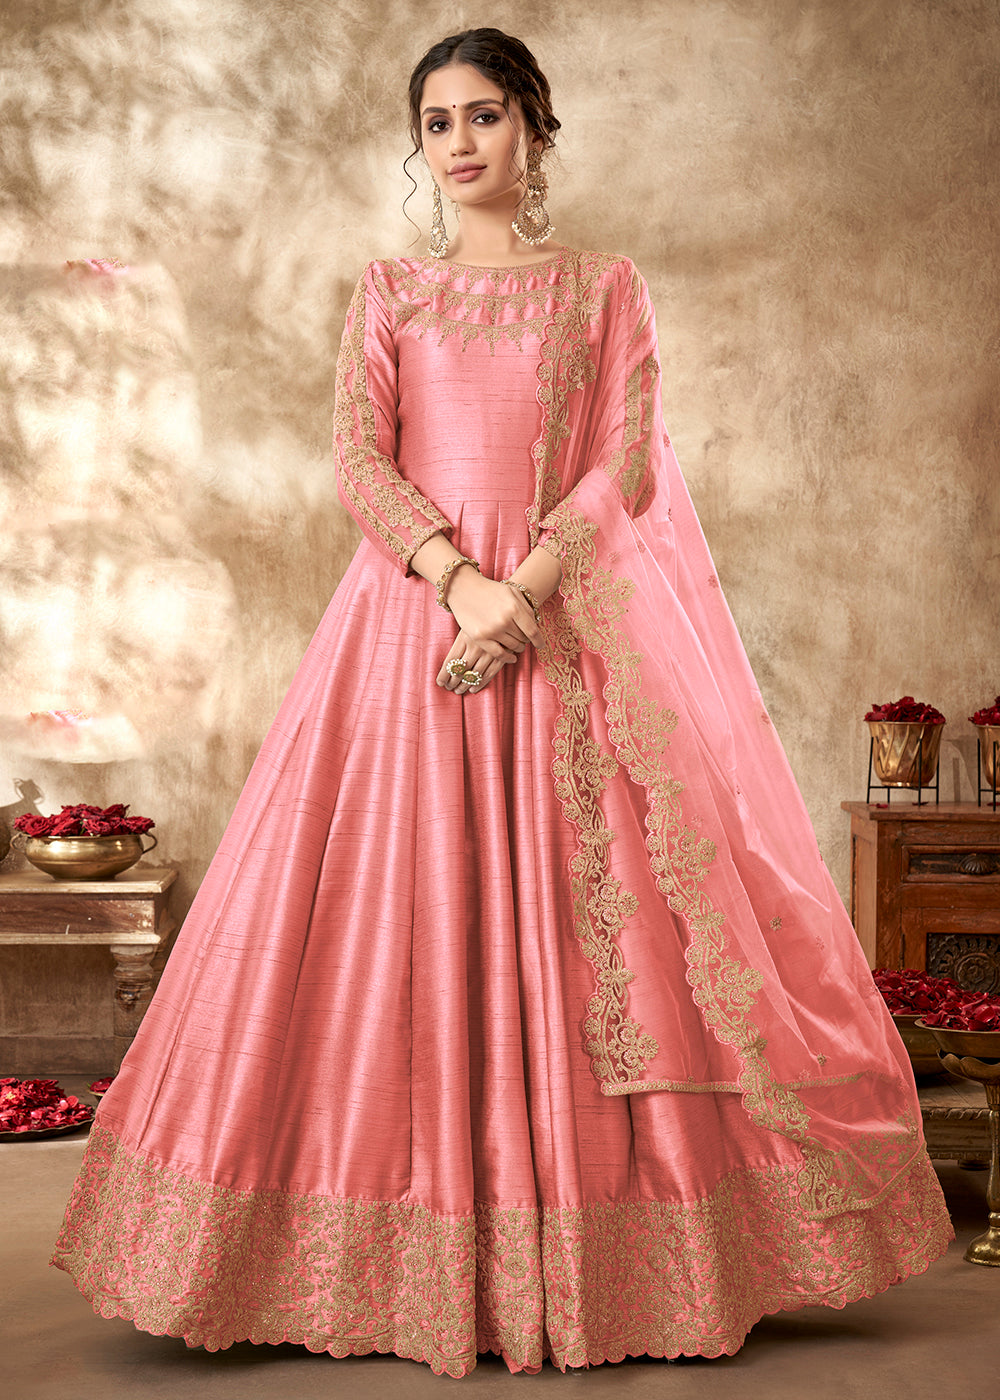 Buy Now Tempting Salmon Pink Art Silk Zari Embroidered Festive Anarkali Gown Online in UK at Empress Clothing. 